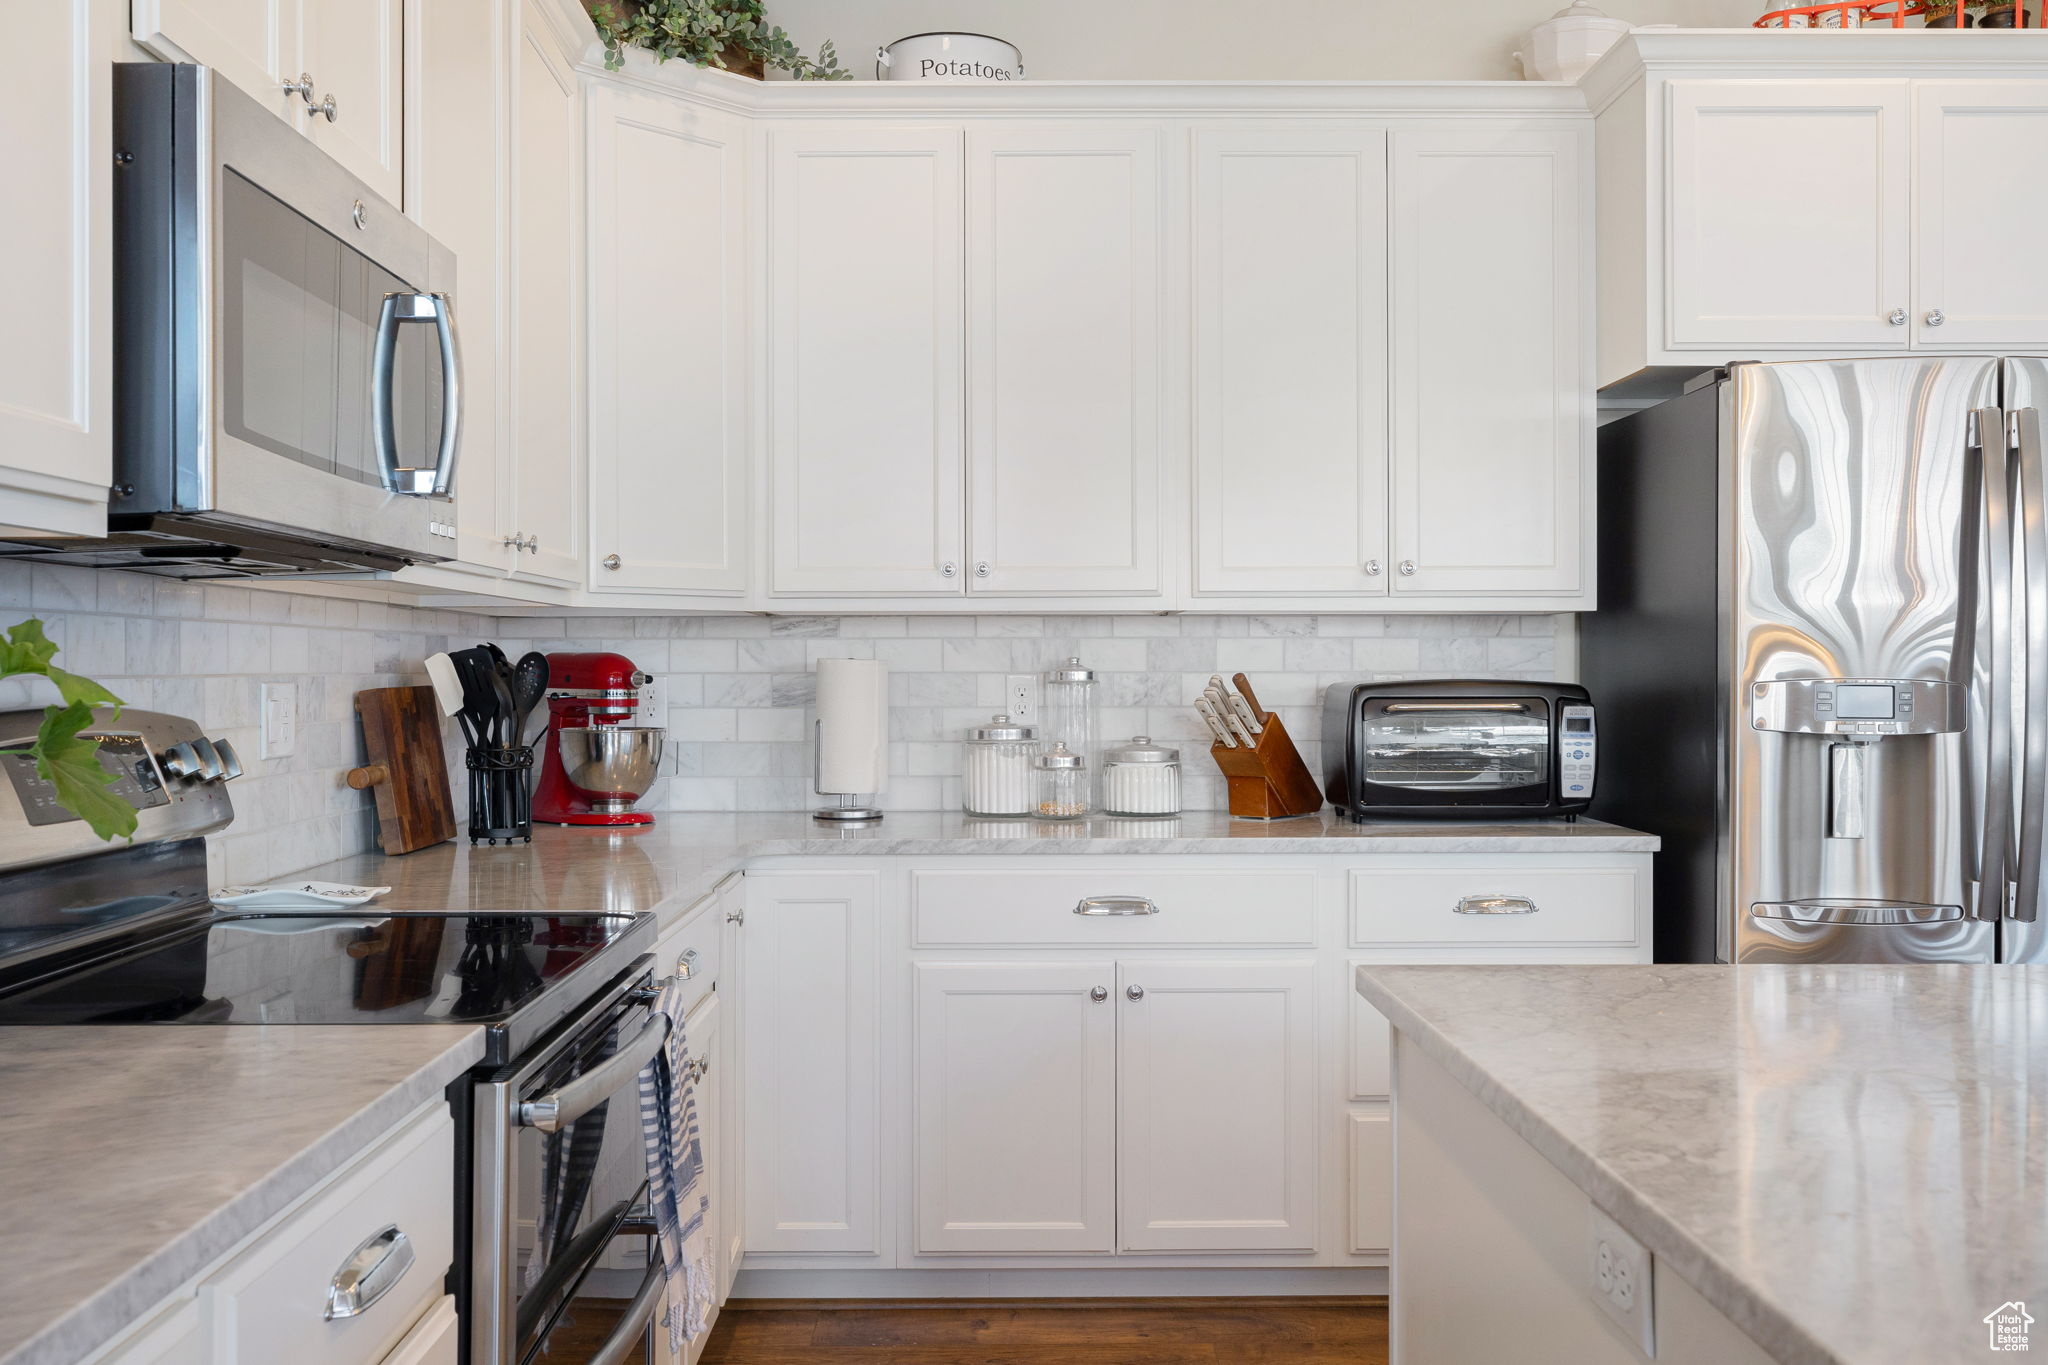 Kitchen featuring white cabinetry, tasteful backsplash, and stainless steel appliances